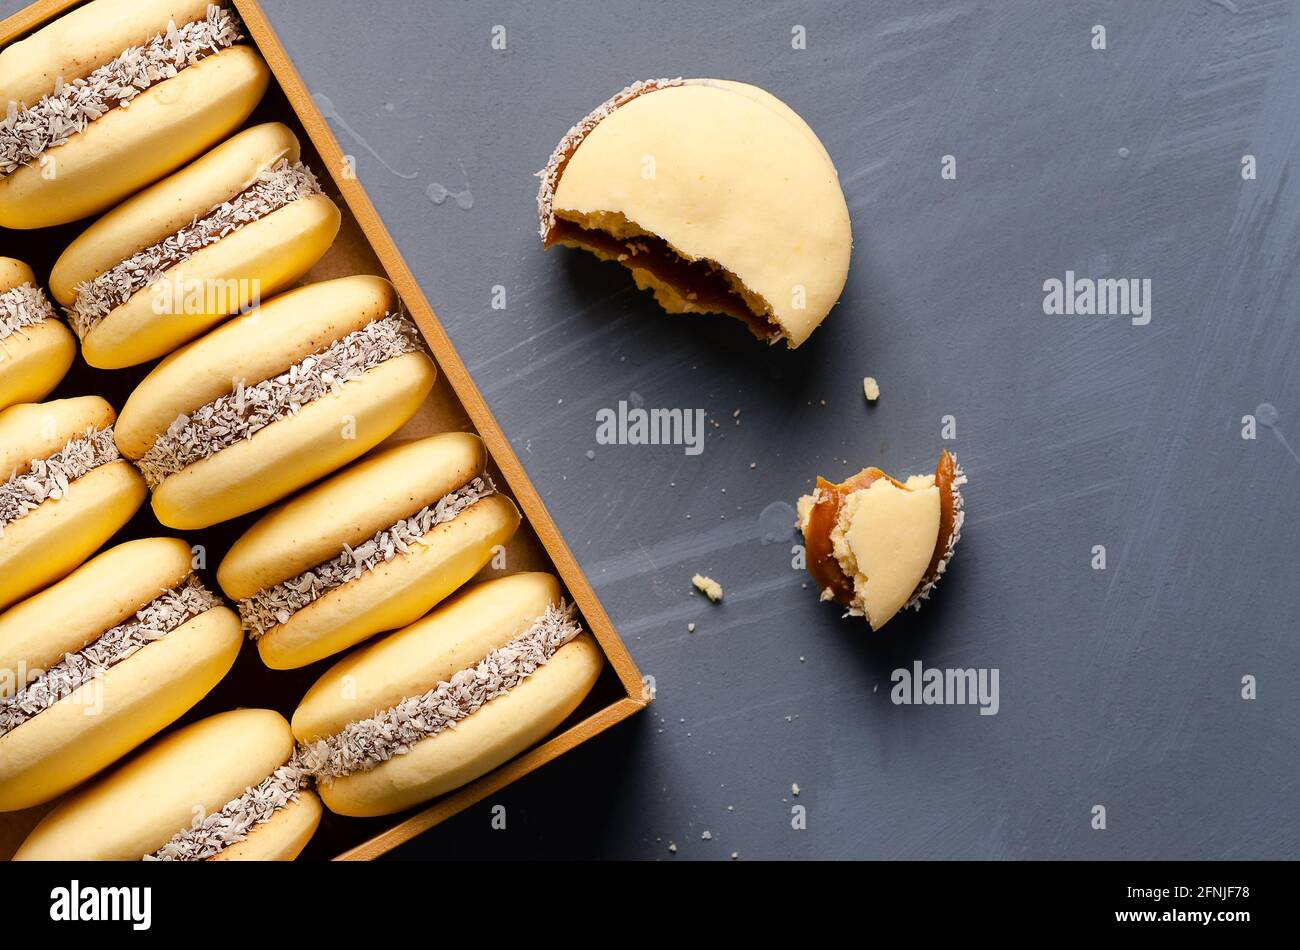 Cornstarch alfajores with milk caramel and coconut in a wooden box on a light blue background. Stock Photo